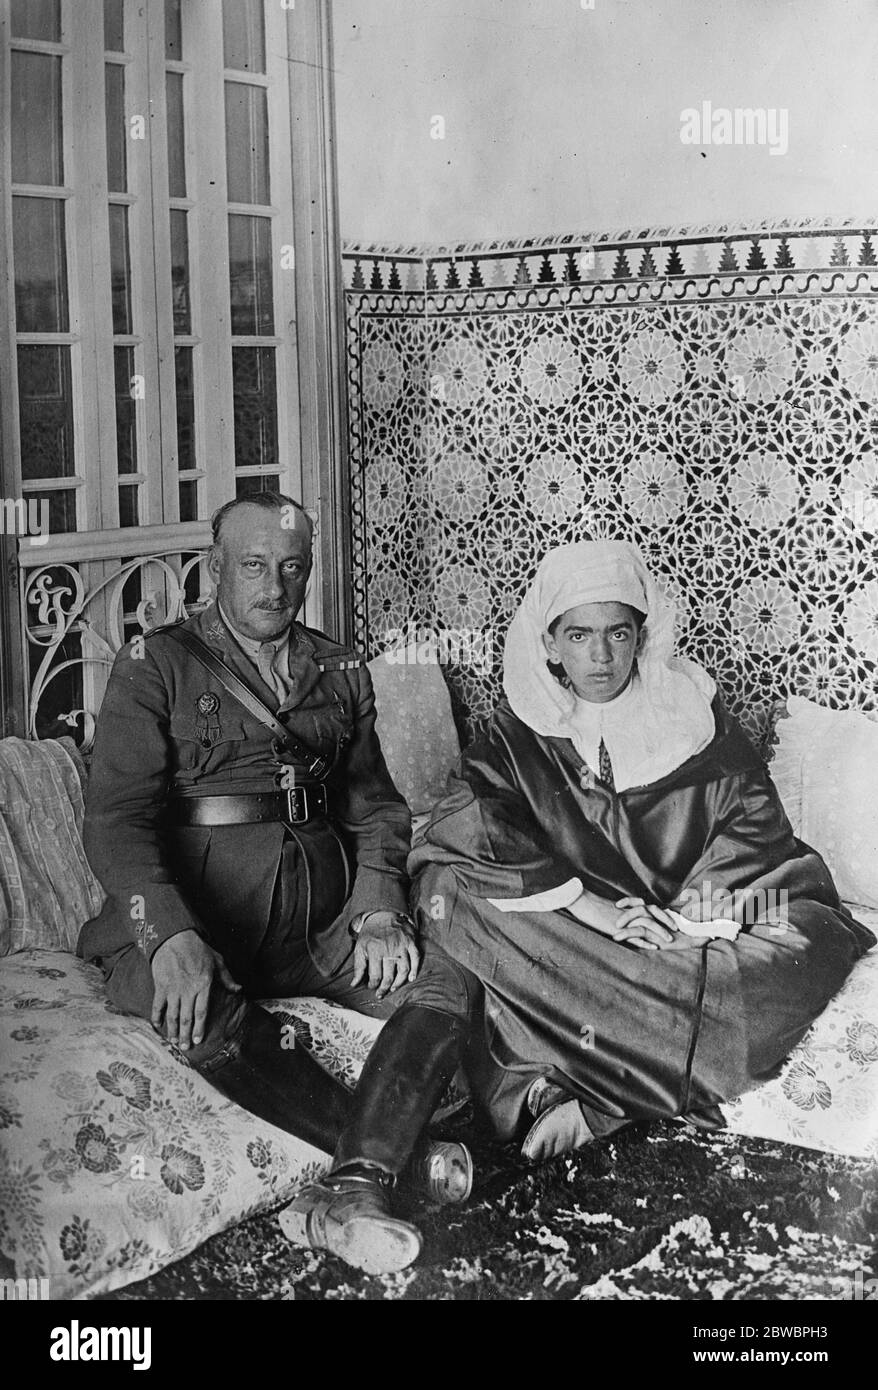 Spain ' s Soldier Champion in Morocco . General Primo de Rivera , the Mussolini of Spain , met El Jaladi son of the famous Raisuli in Morrocco . General Rivera with the French General Chambrun , Chief of the Fez Region , sent as the representative of the French Resident in Africa to confer with him on policy in Morocco . 26 July 1924 Stock Photo